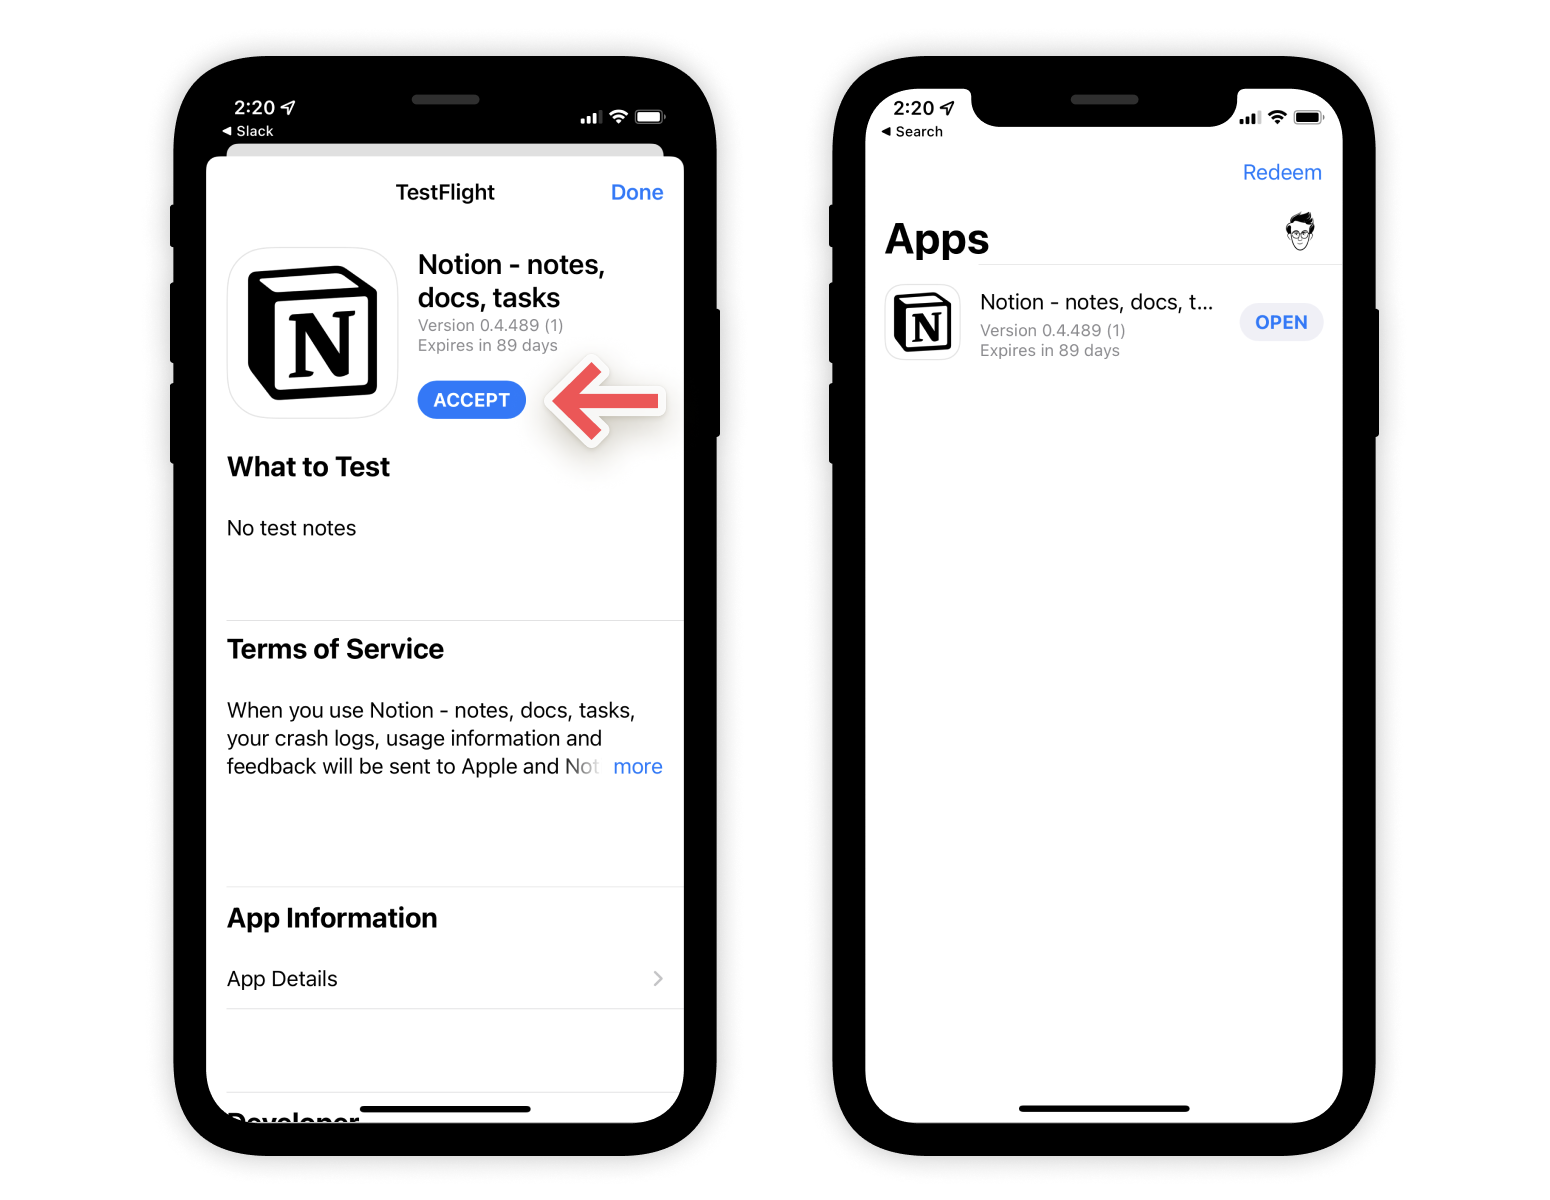 Screenshots of the process of using TestFlight to sign up for Notion's iOS beta.